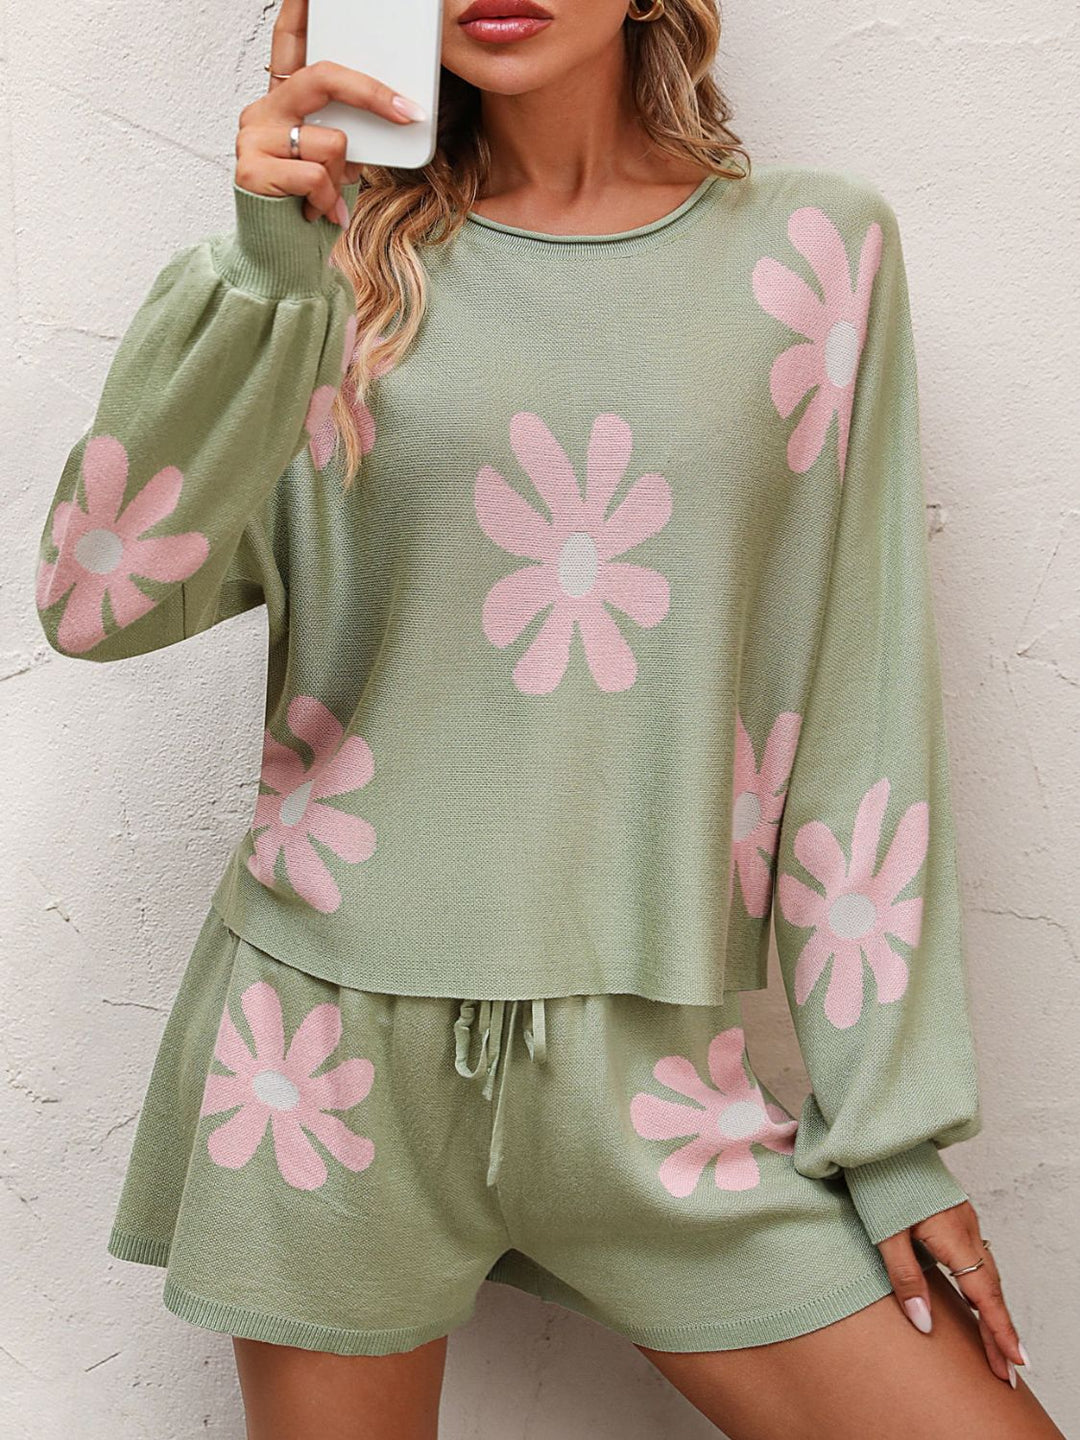 Floral Print Raglan Sleeve Knit Top and Tie Front Sweater Shorts Set - lounge set - Wild Willows Boutique - Massapequa, NY, affordable and fashionable clothing for women of all ages. Bottoms, tops, dresses, intimates, outerwear, sweater, shoes, accessories, jewelry, active wear, and more // Wild Willow Boutique.